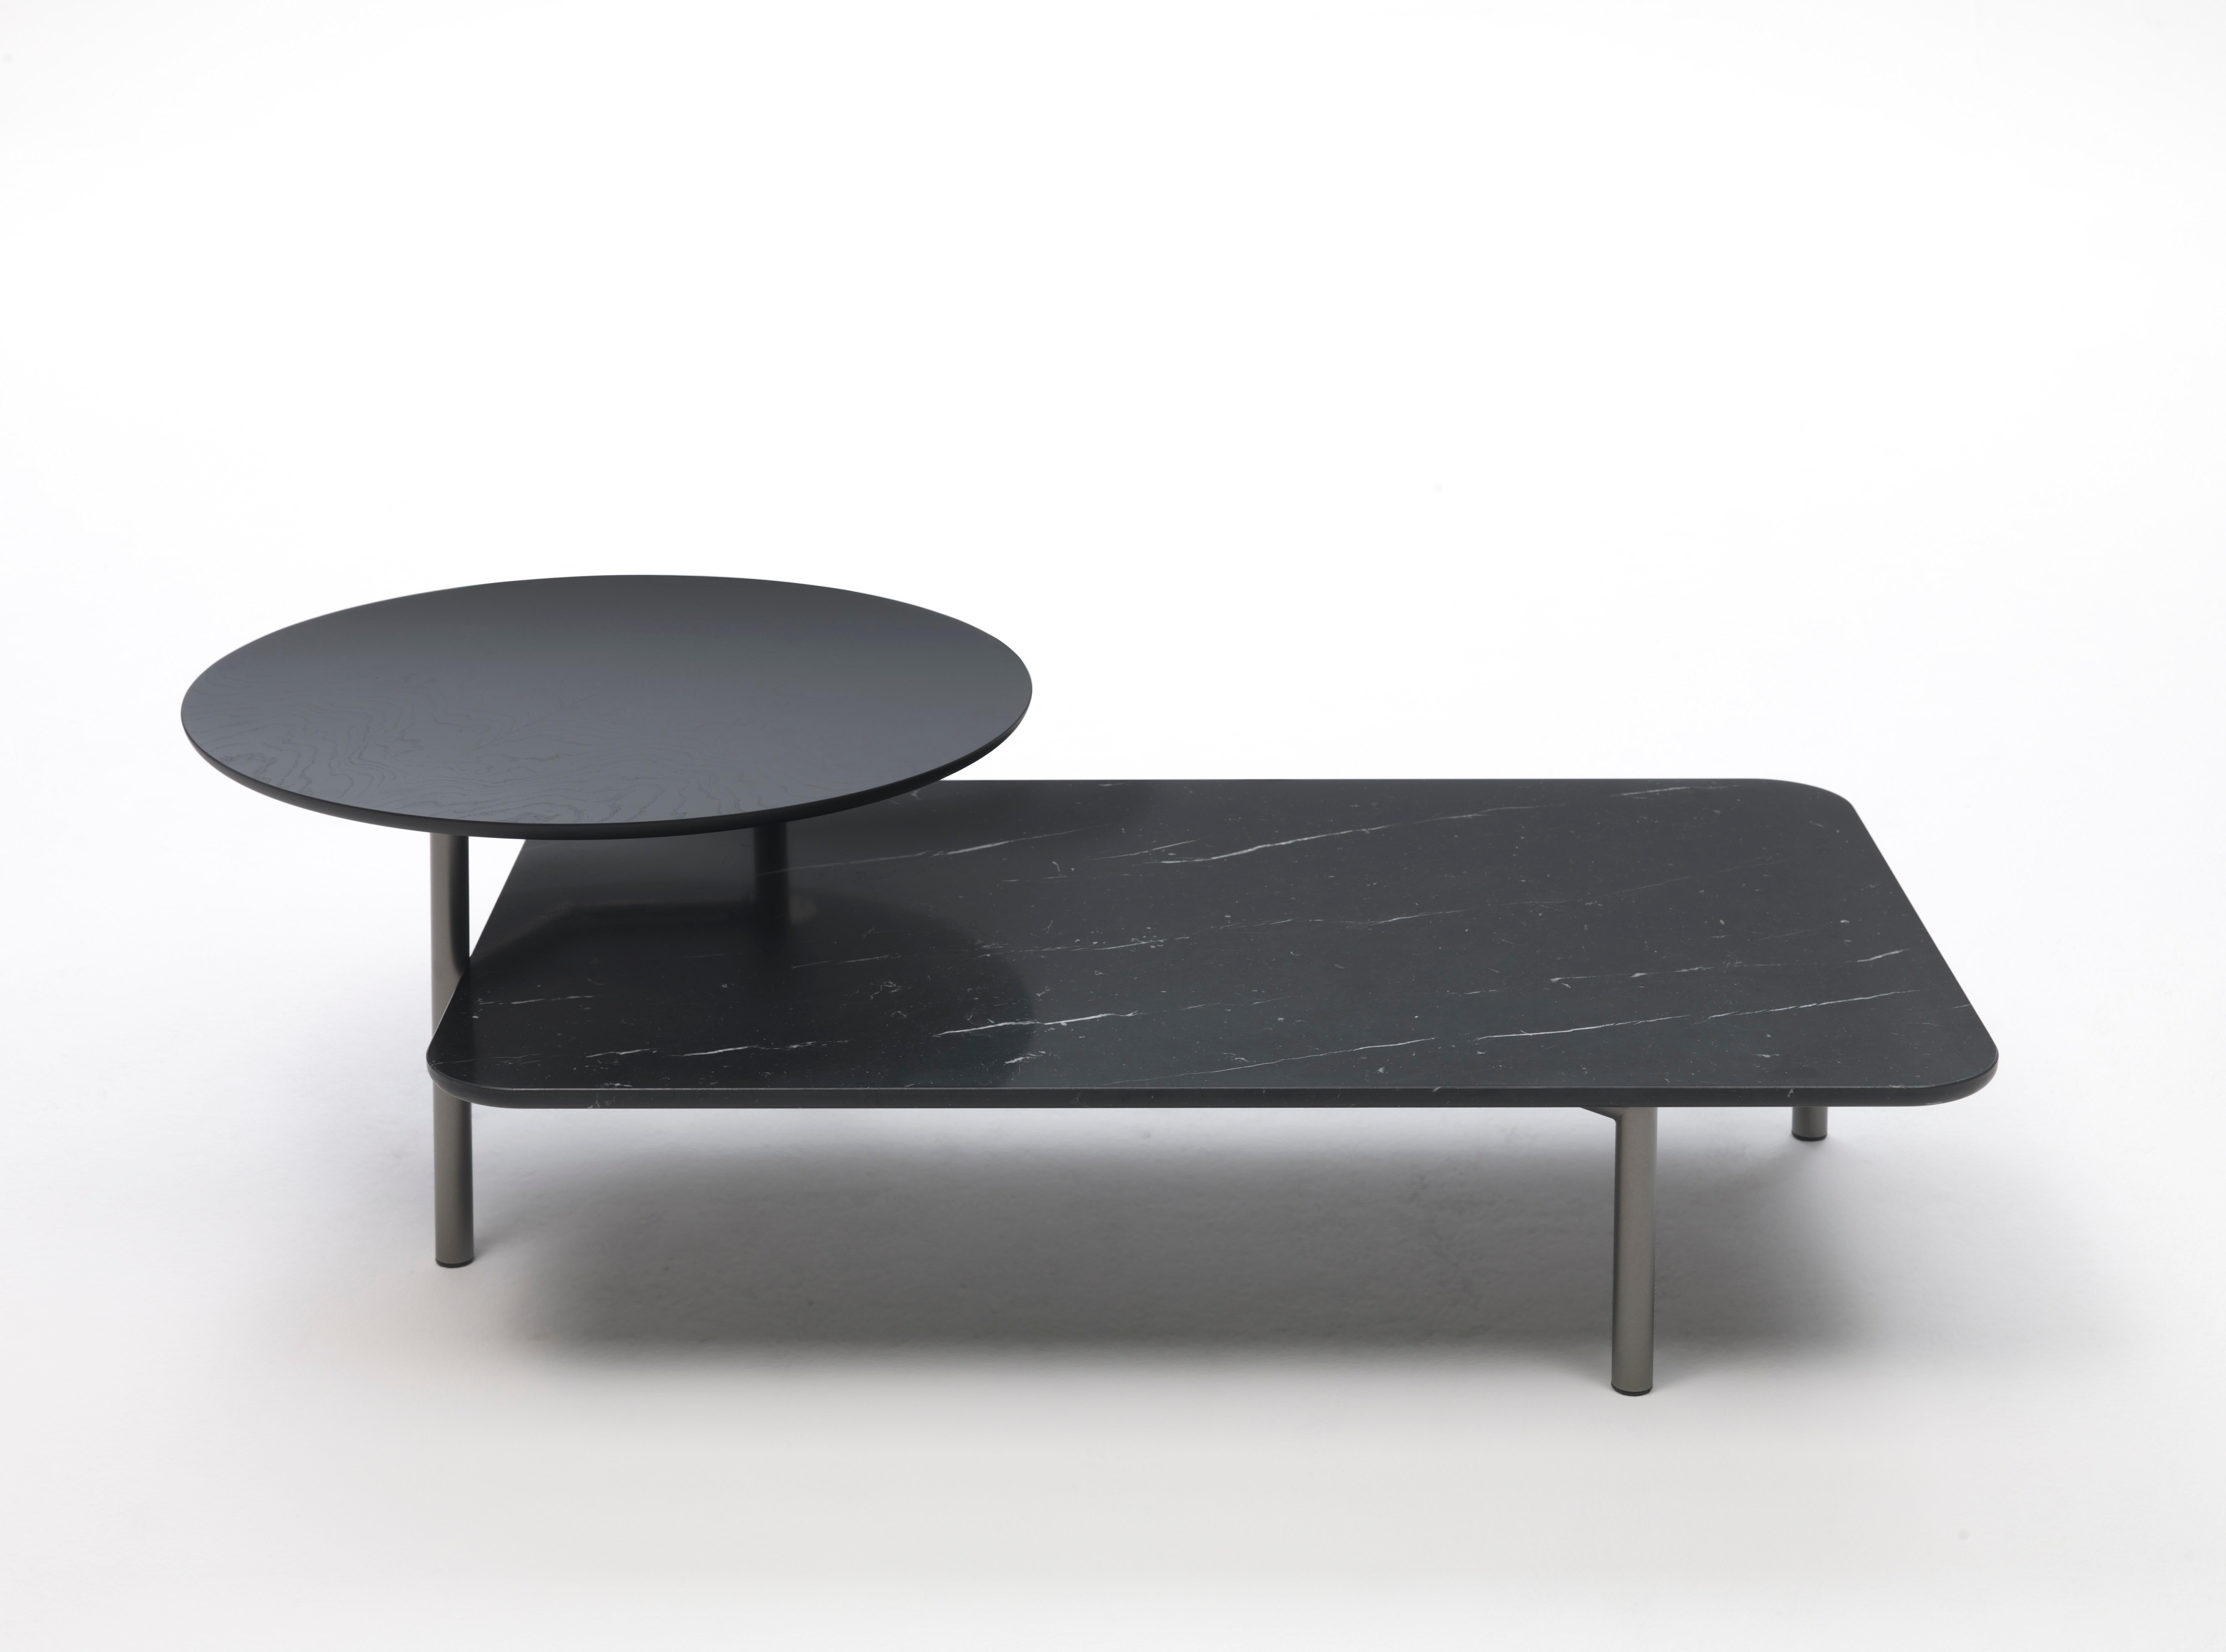 Nero marble bitop coffee table by Rodolfo Dordoni
Materials: Base in bronze lacquered metal. 2 versions of tops: black Marquina marble, white Carrara marble, or gray smoked glass
Technique: Lacquered metal, polished marble. 
Dimensions: 140 x 85